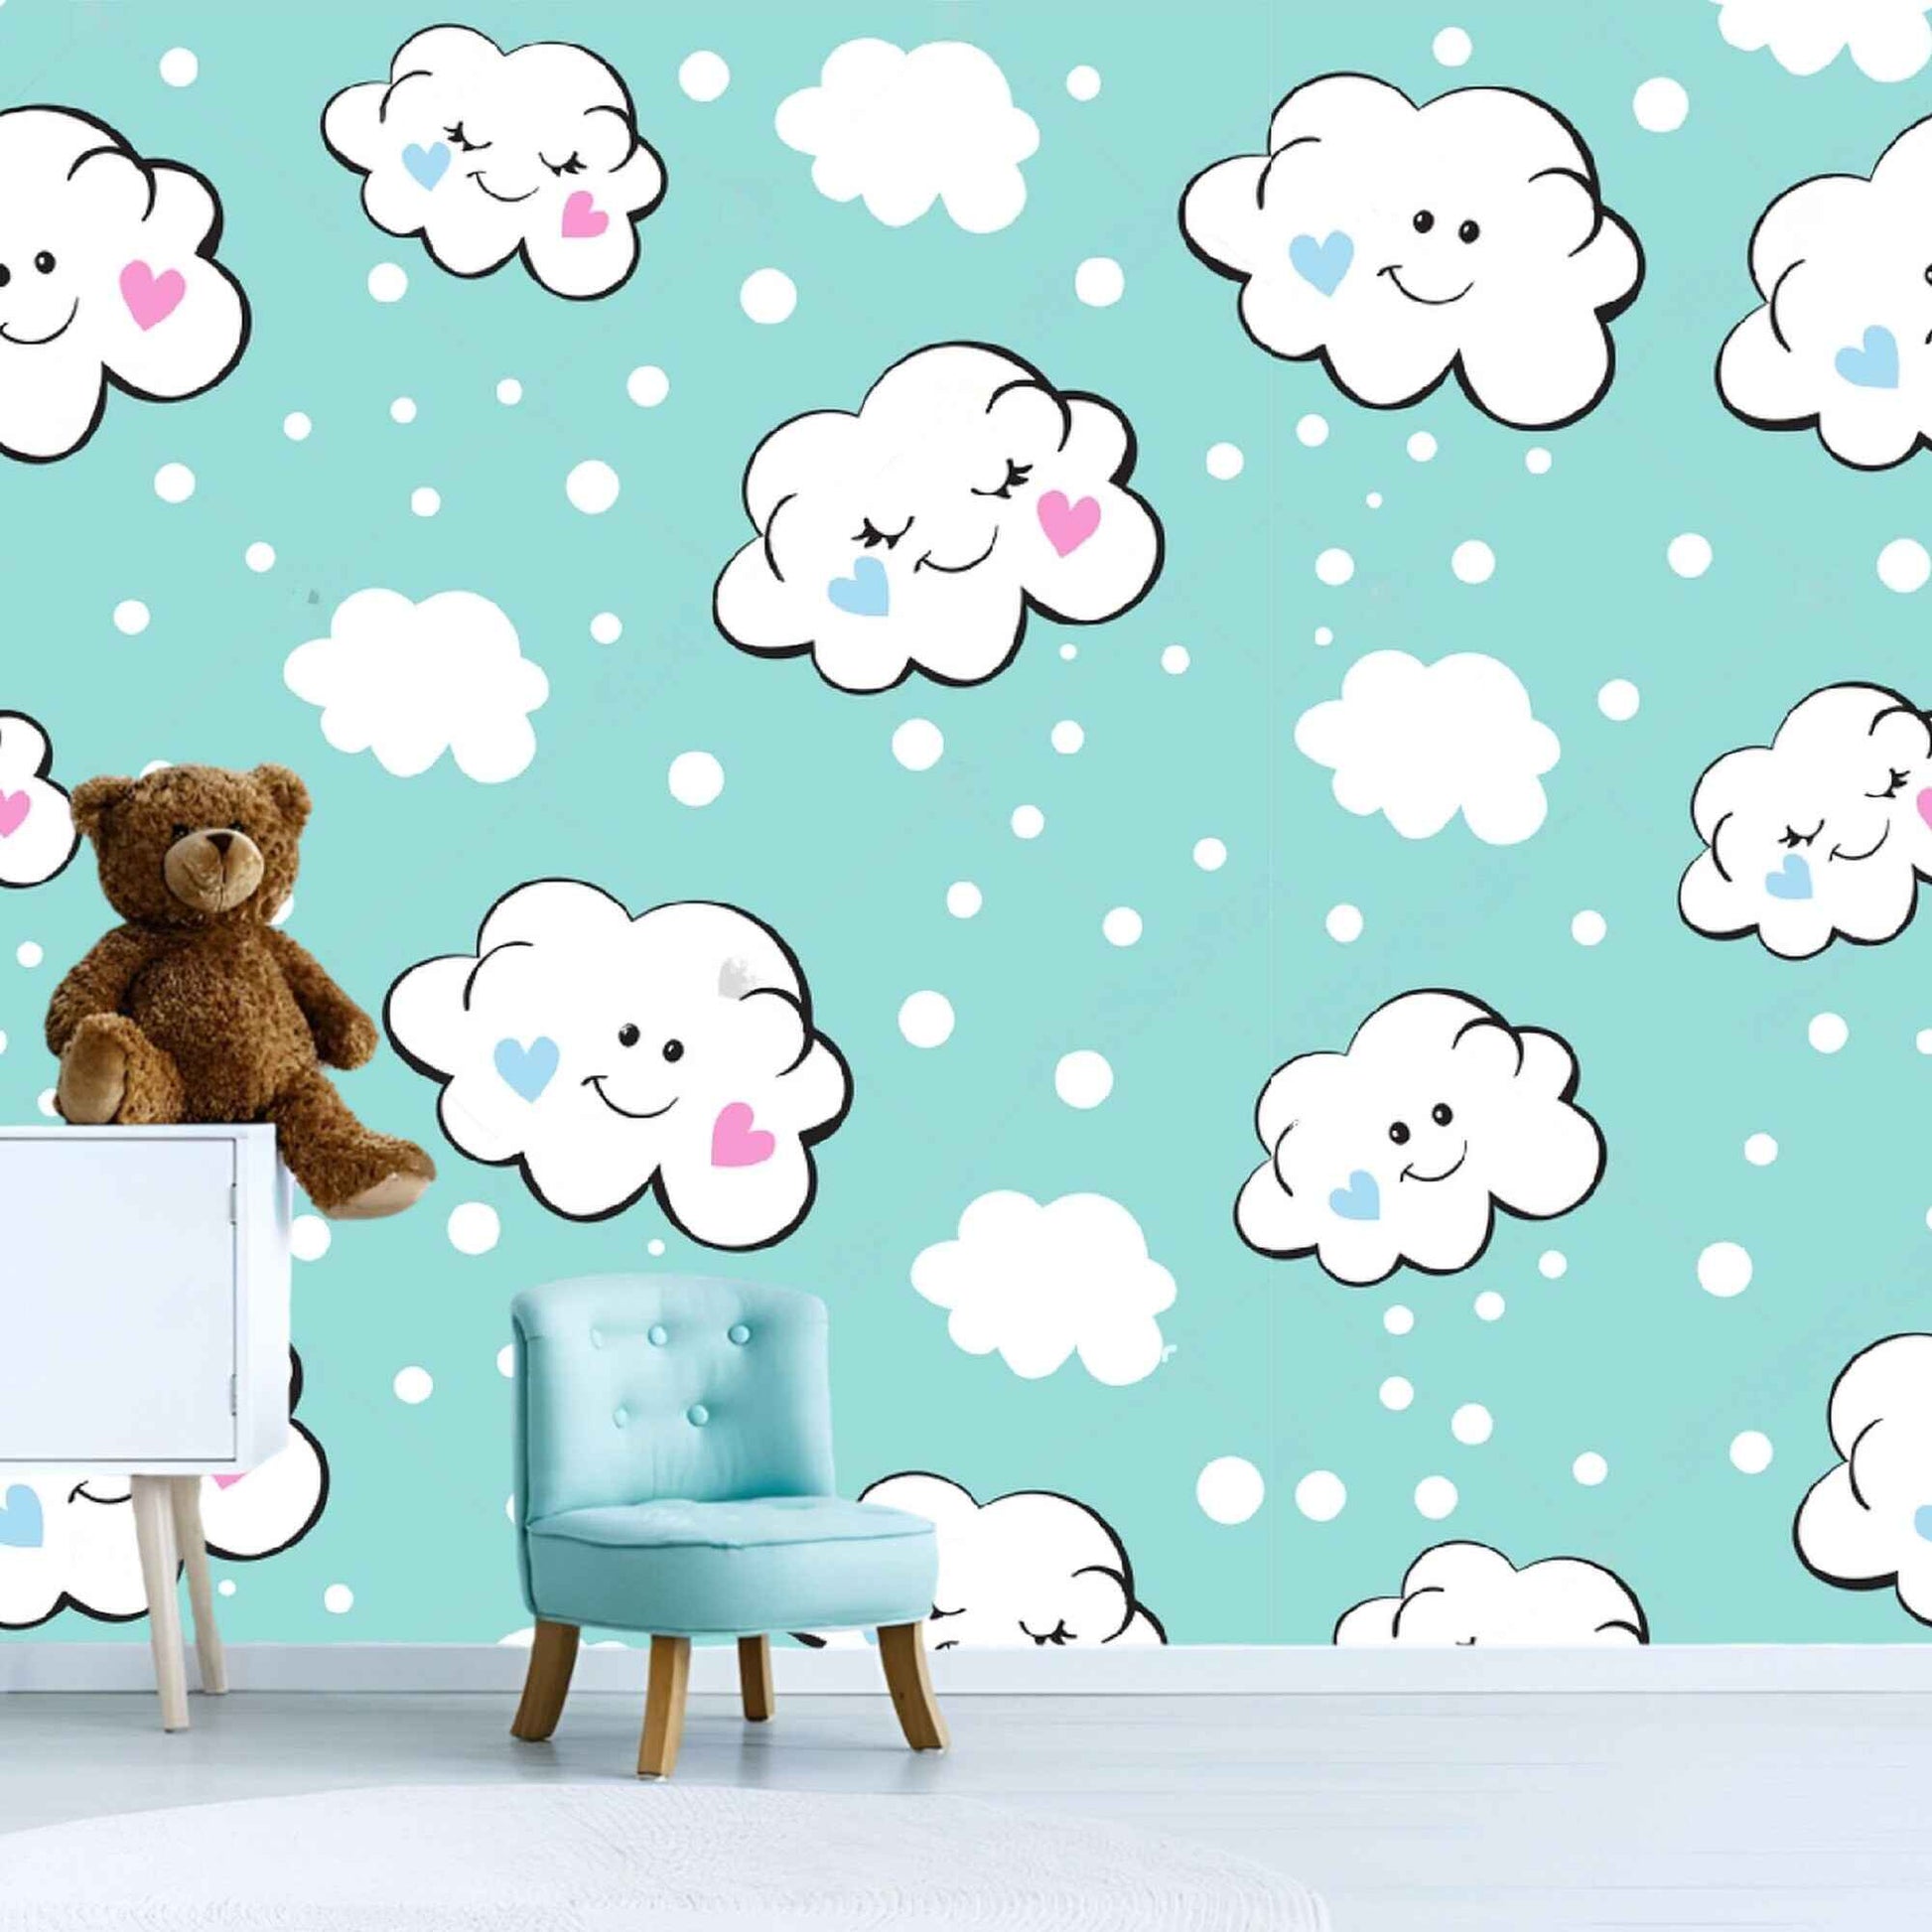 Whimsical clouds mural kids wallpaper in a bedroom, evoking a dreamy and tranquil ambiance.